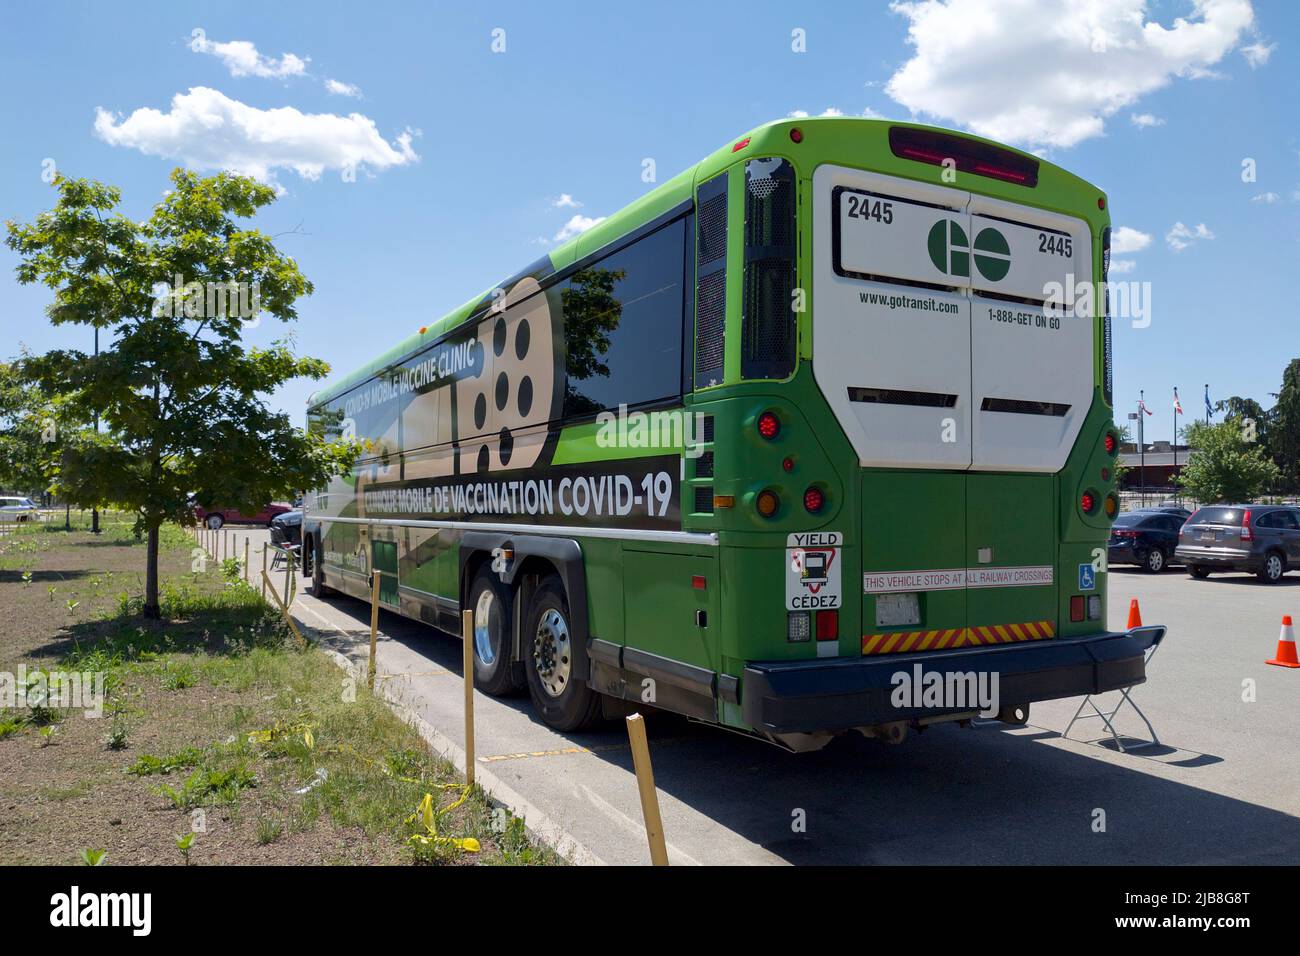 A Toronto Go bus, offering free Coved-19 vaccines in Toronto Stock Photo